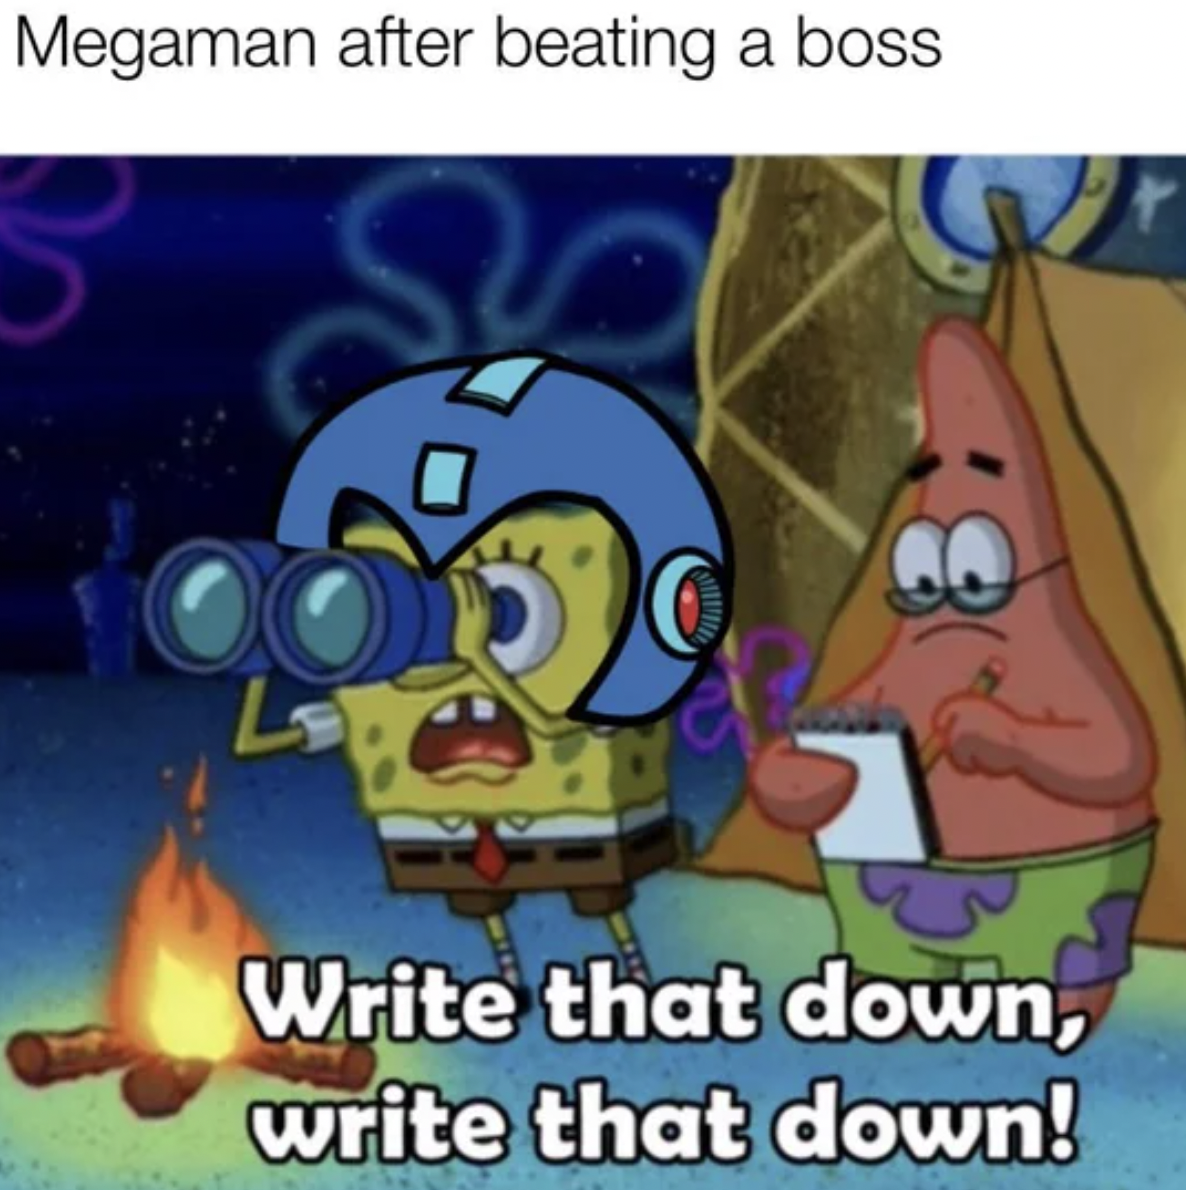 Gaming memes - Megaman after beating a boss L Write that down, write that down!